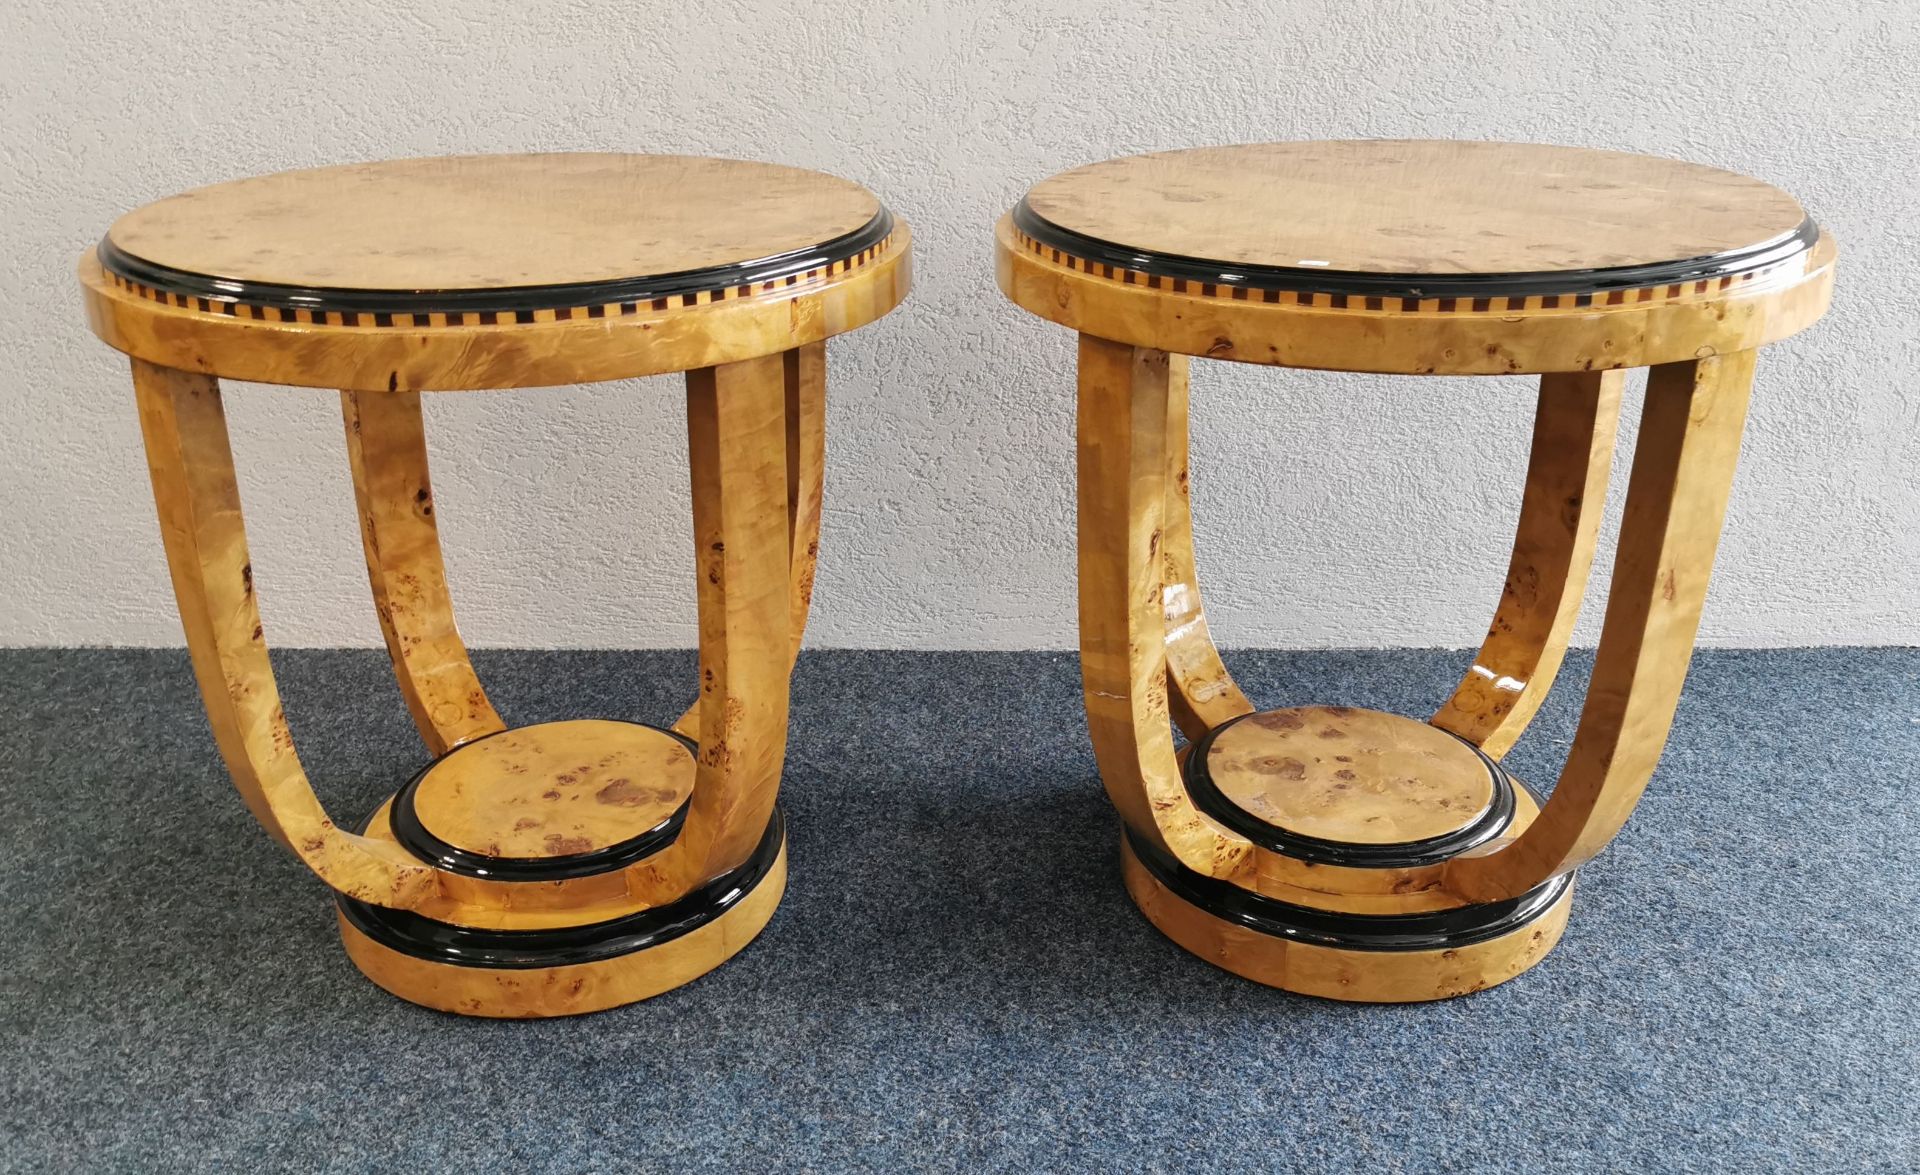 SIDE TABLES IN ART DÉCO STYLE